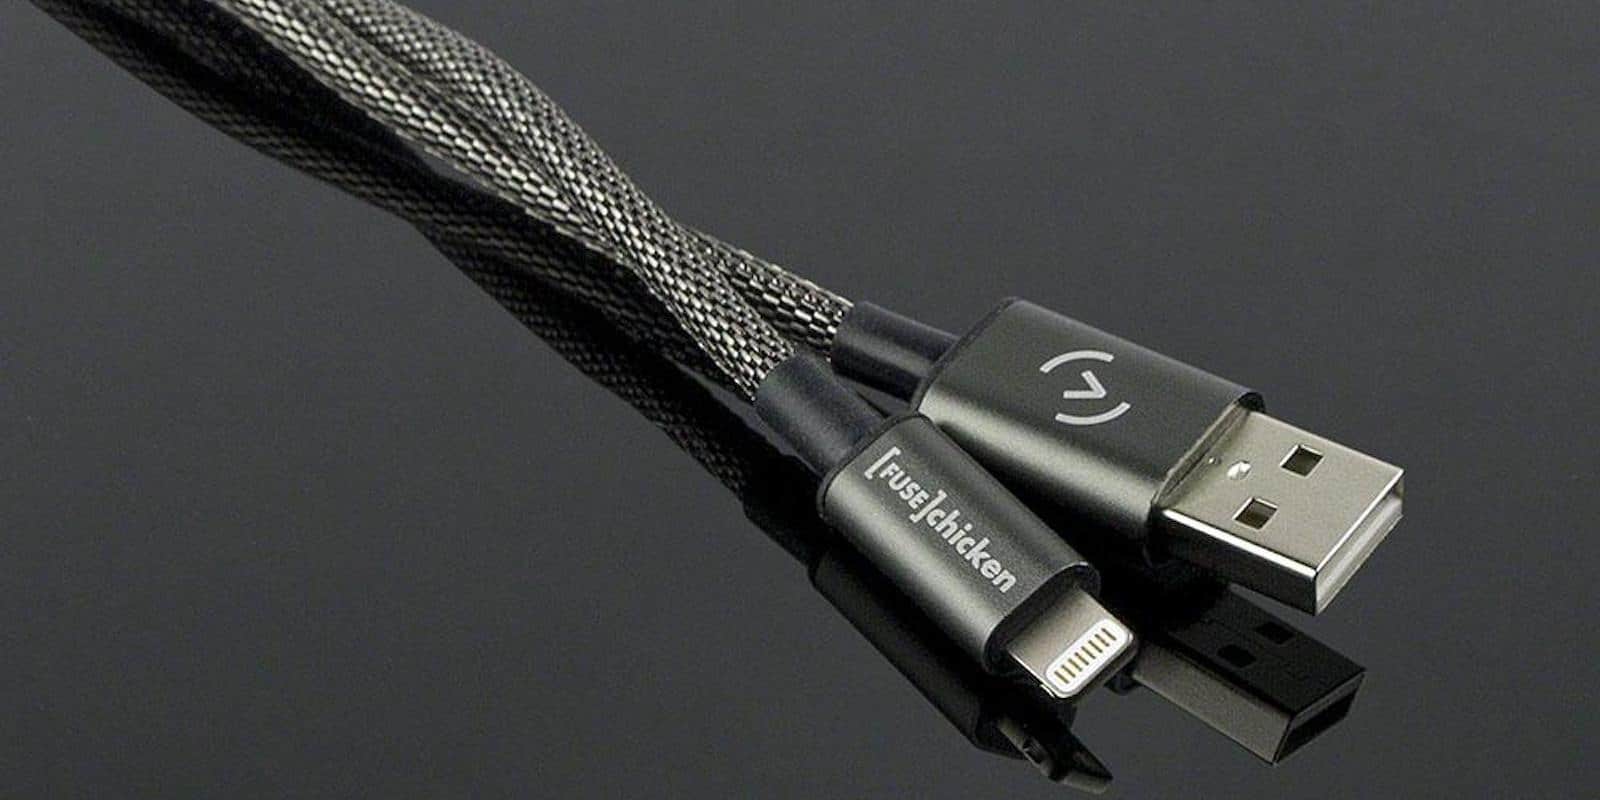 This Lightning cable is battle-ready with a layer of stainless steel armor.